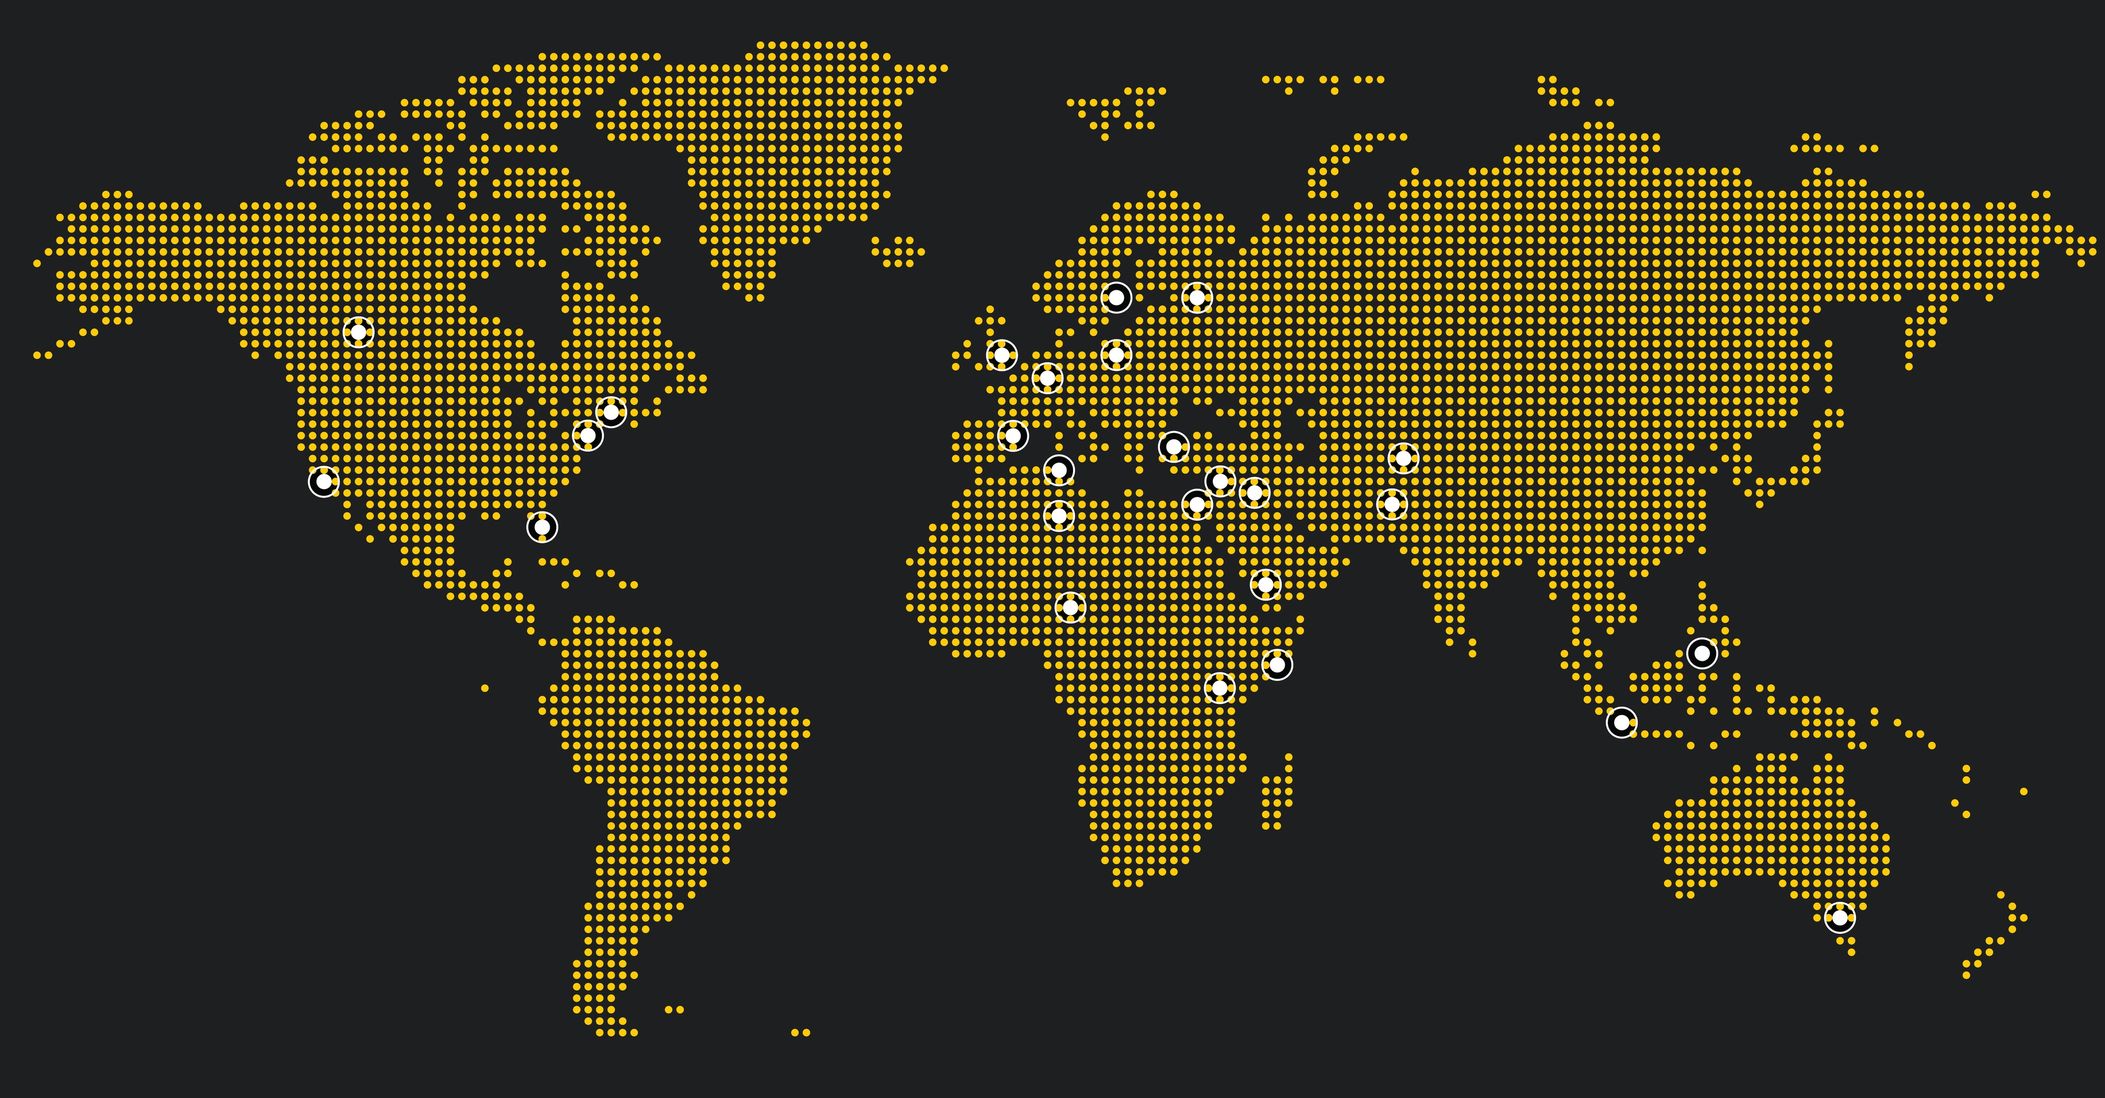 Graphic world map in yellow tiles with white target markings across the map.